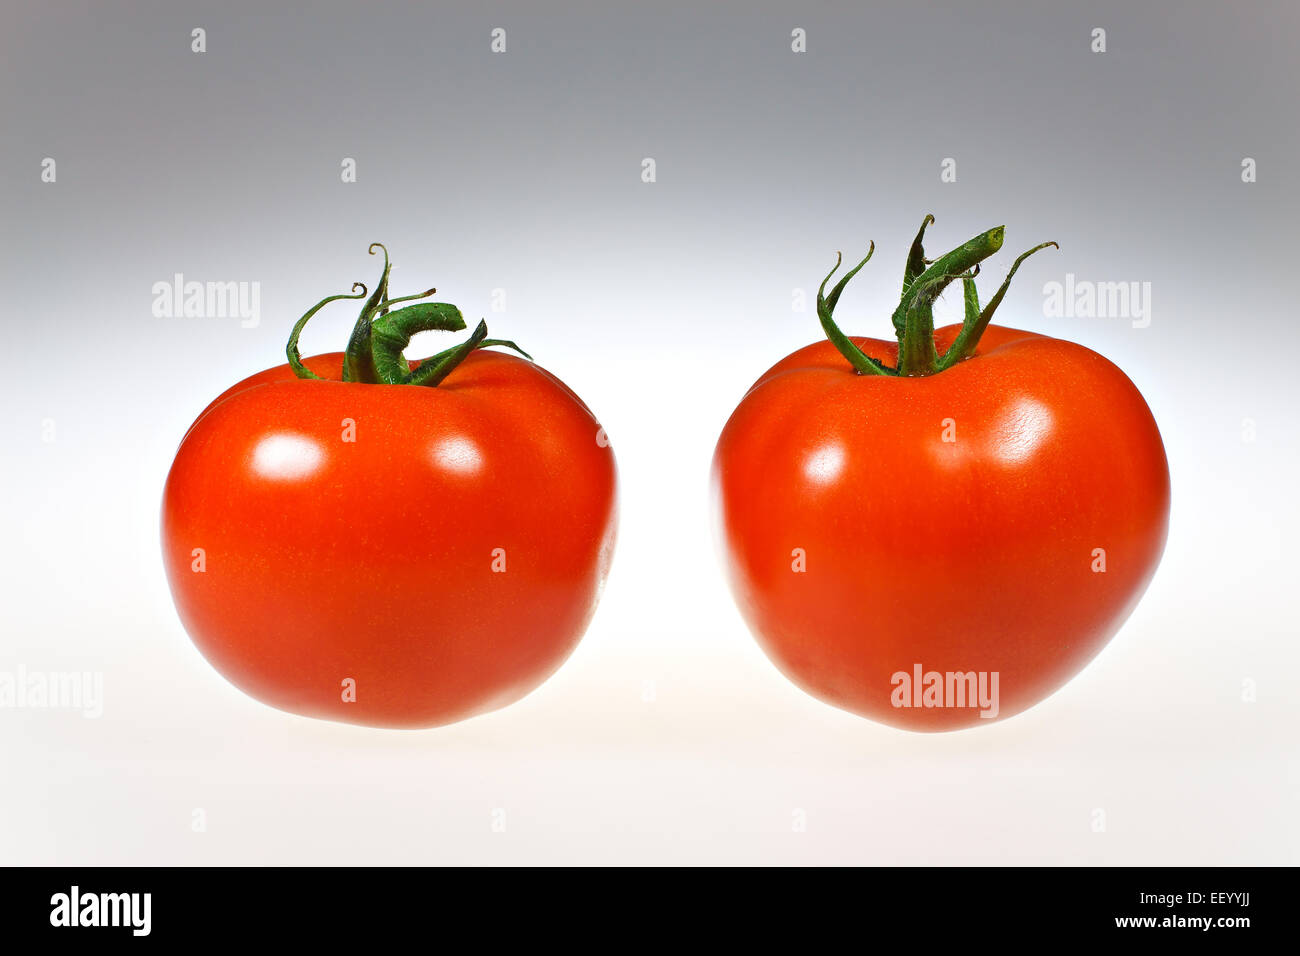 Two tomatoes Stock Photo